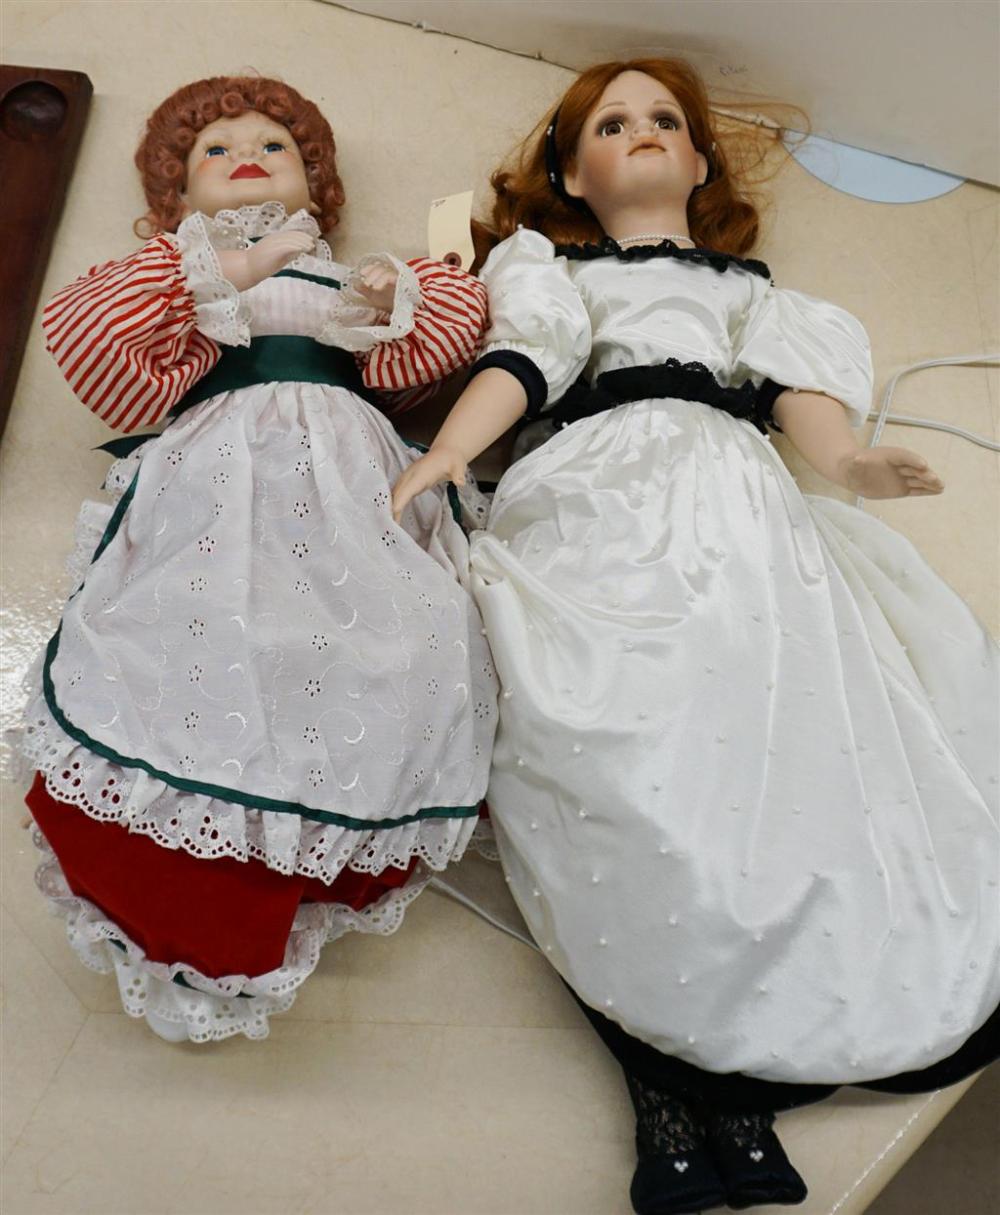 TWO PORCELAIN HEAD DOLLS, H OF